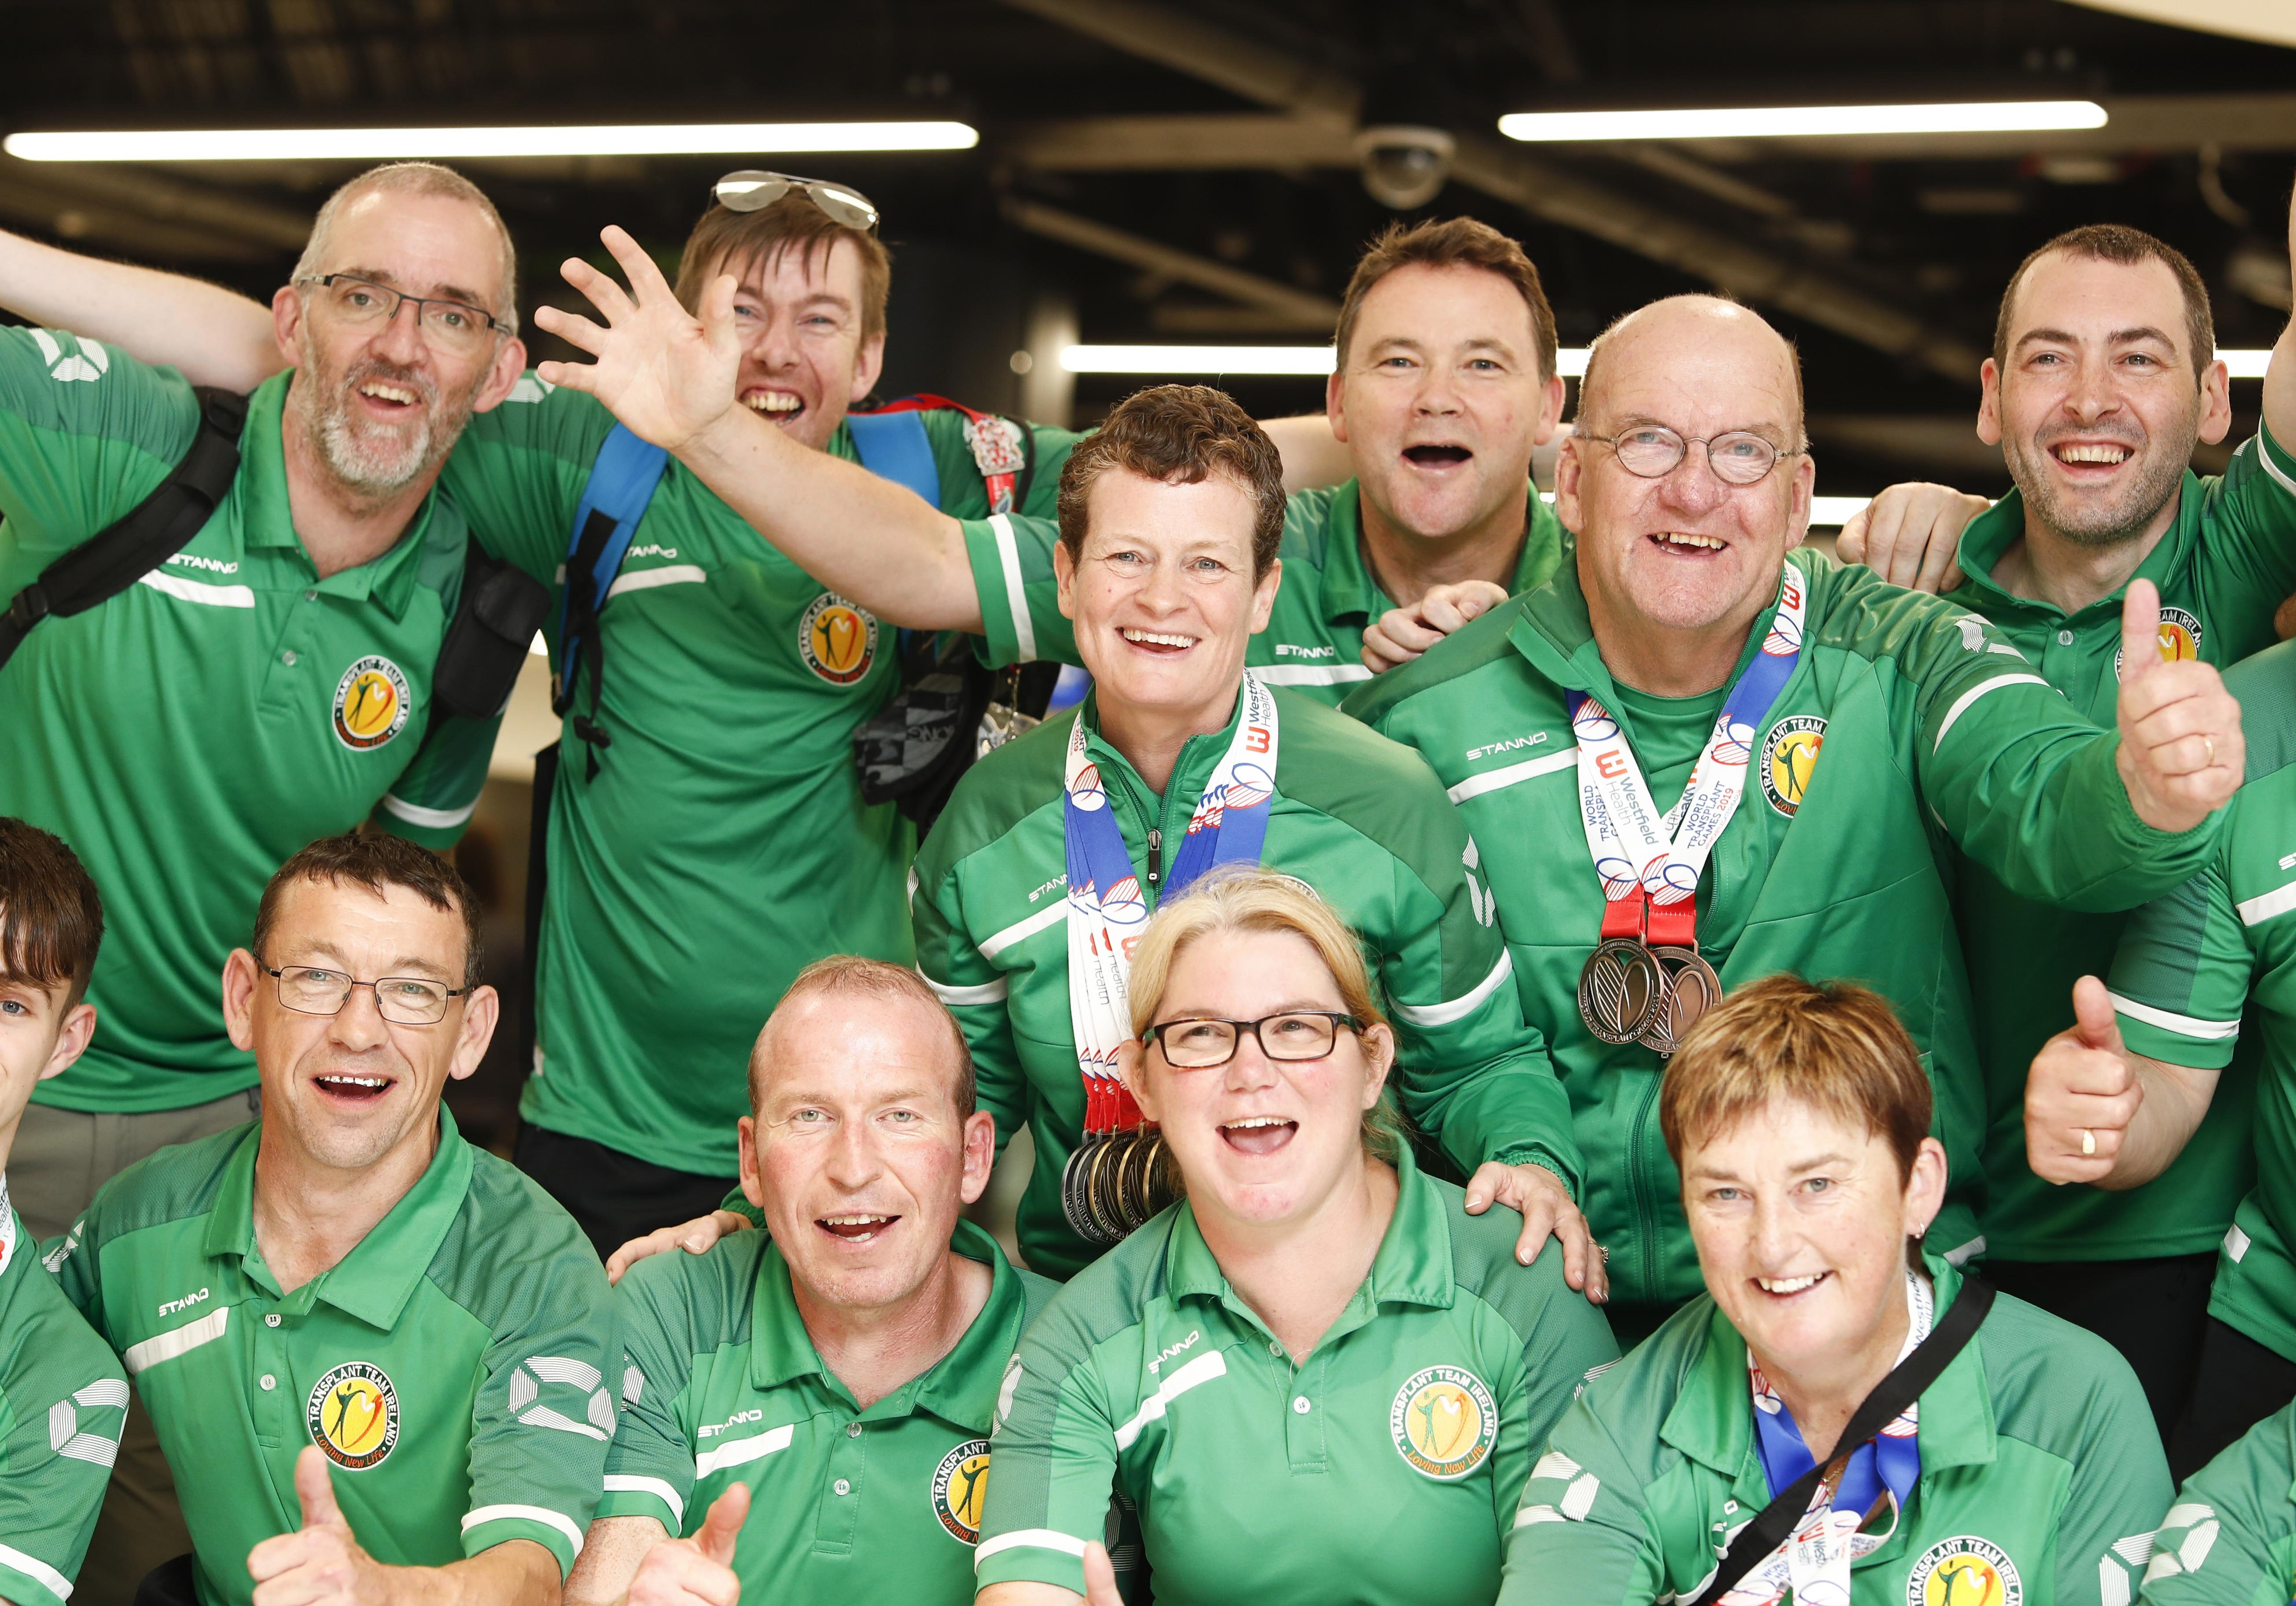 *** NO REPRODUCTION FEE *** DUBLIN : 24/8/2019 : Team Ireland returns home from World Transplant Games with mighty haul of 50 medals. Pictured was Transplant Team Ireland team members arriving back to Dublin Airport from the World Transplant Games 2019 held in Newcastle Gateshead, UK. 38 members of Transplant Team Ireland returned home this weekend from an unforgettable week-long World Transplant Games which were held in Newcastle Gateshead, UK.  The Irish team including heart, lung, liver, bone marrow and kidney transplant recipients, which ranges in age from 16 to 81, had a final medals tally of 50 medals including 17 Gold, 18 Silver and 15 Bronze which earned them a respectable 11th place on the leader board amongst 56 countries some with larger teams and the host country GB&amp;NI was placed first with its 320 participants. The team's participation at the games was managed by the Irish Kidney Association who are hoping to attract more people to the team when they host the 2020 European Transplant &amp; Dialysis Sports Championships in Dublin from 2-9 August. Picture Conor McCabe Photography.


MEDIA CONTACT : Gwen O'Donoghue mob. 086 8241447 email gwenodonoghue1@gmail.com